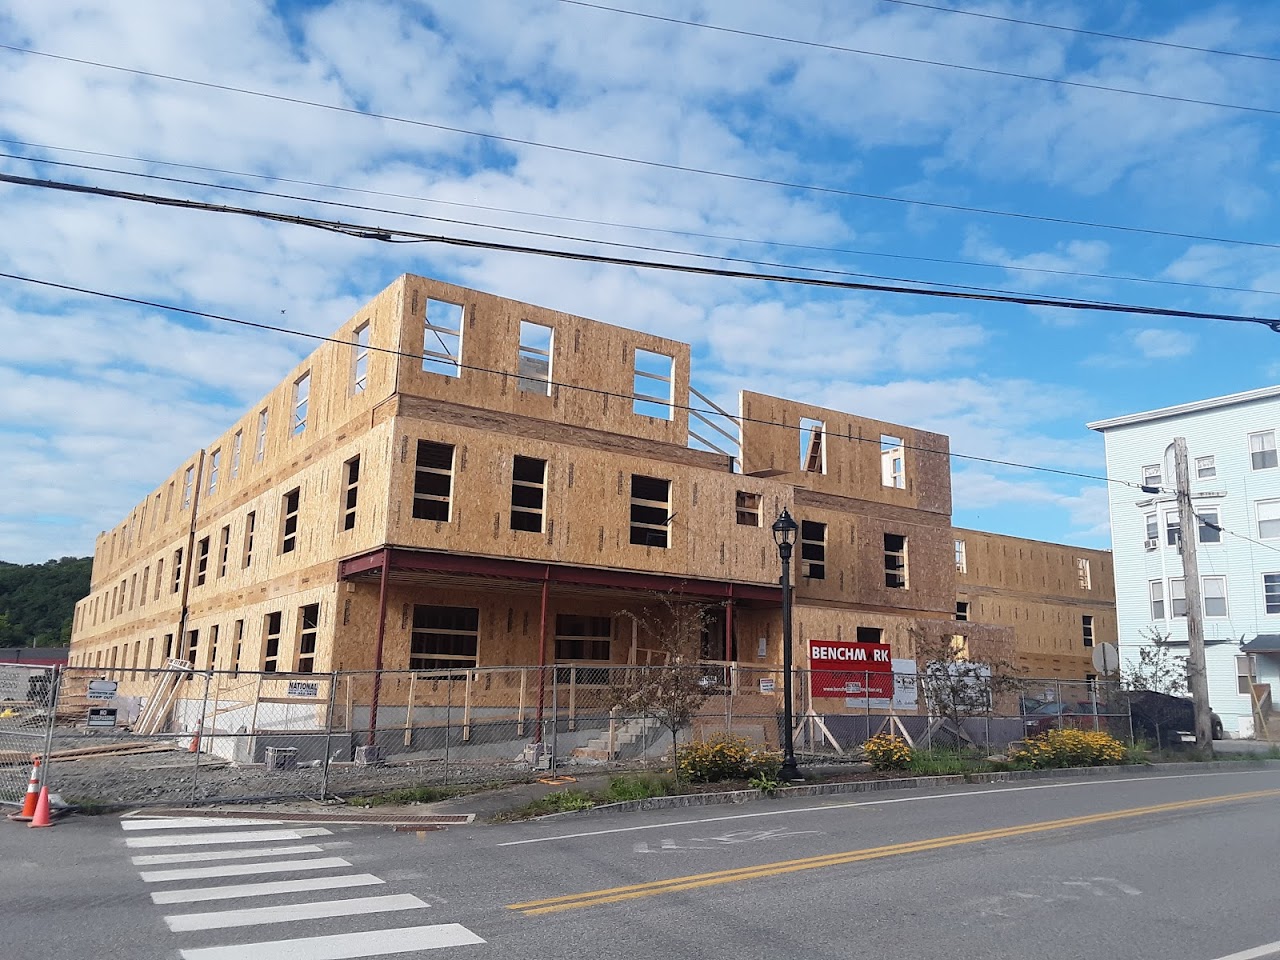 Photo of 48 HAMPSHIRE STREET. Affordable housing located at 48 HAMPSHIRE STREET AUBURN, ME 04210